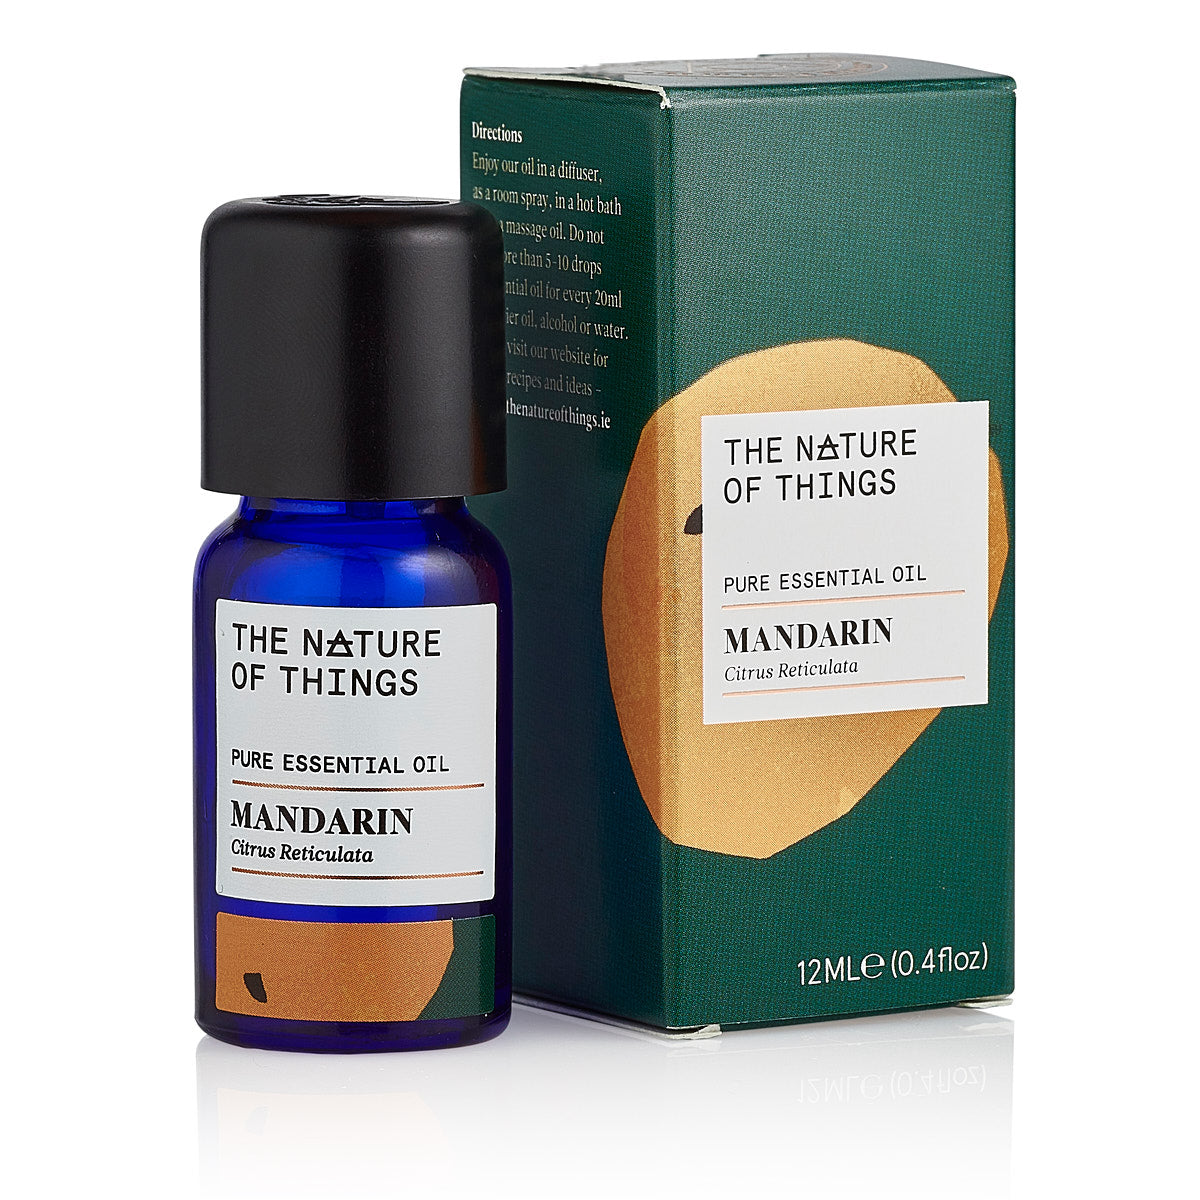 Mandarin Essential Oil from The Nature of Things